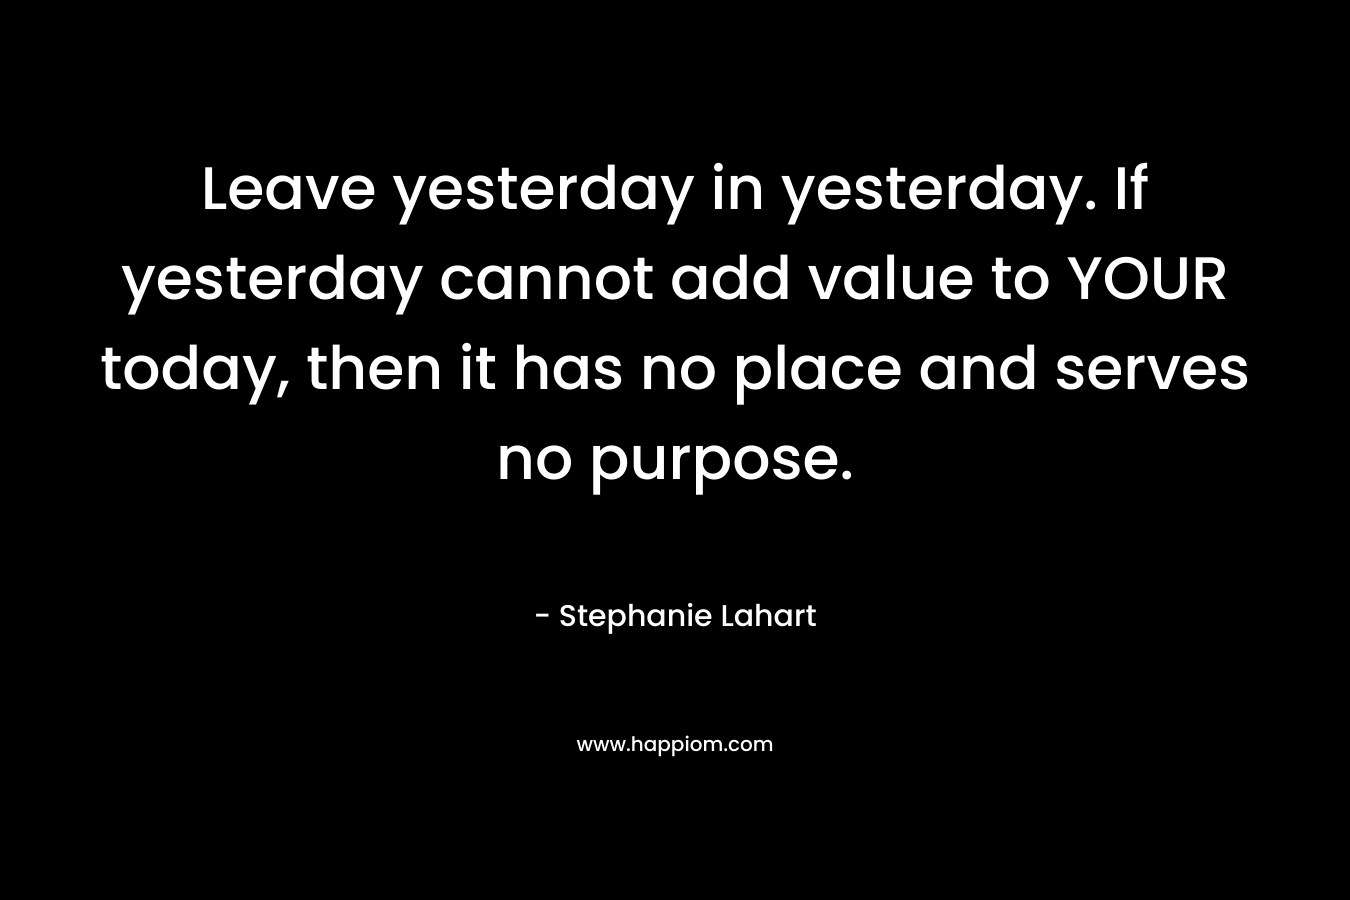 Leave yesterday in yesterday. If yesterday cannot add value to YOUR today, then it has no place and serves no purpose.